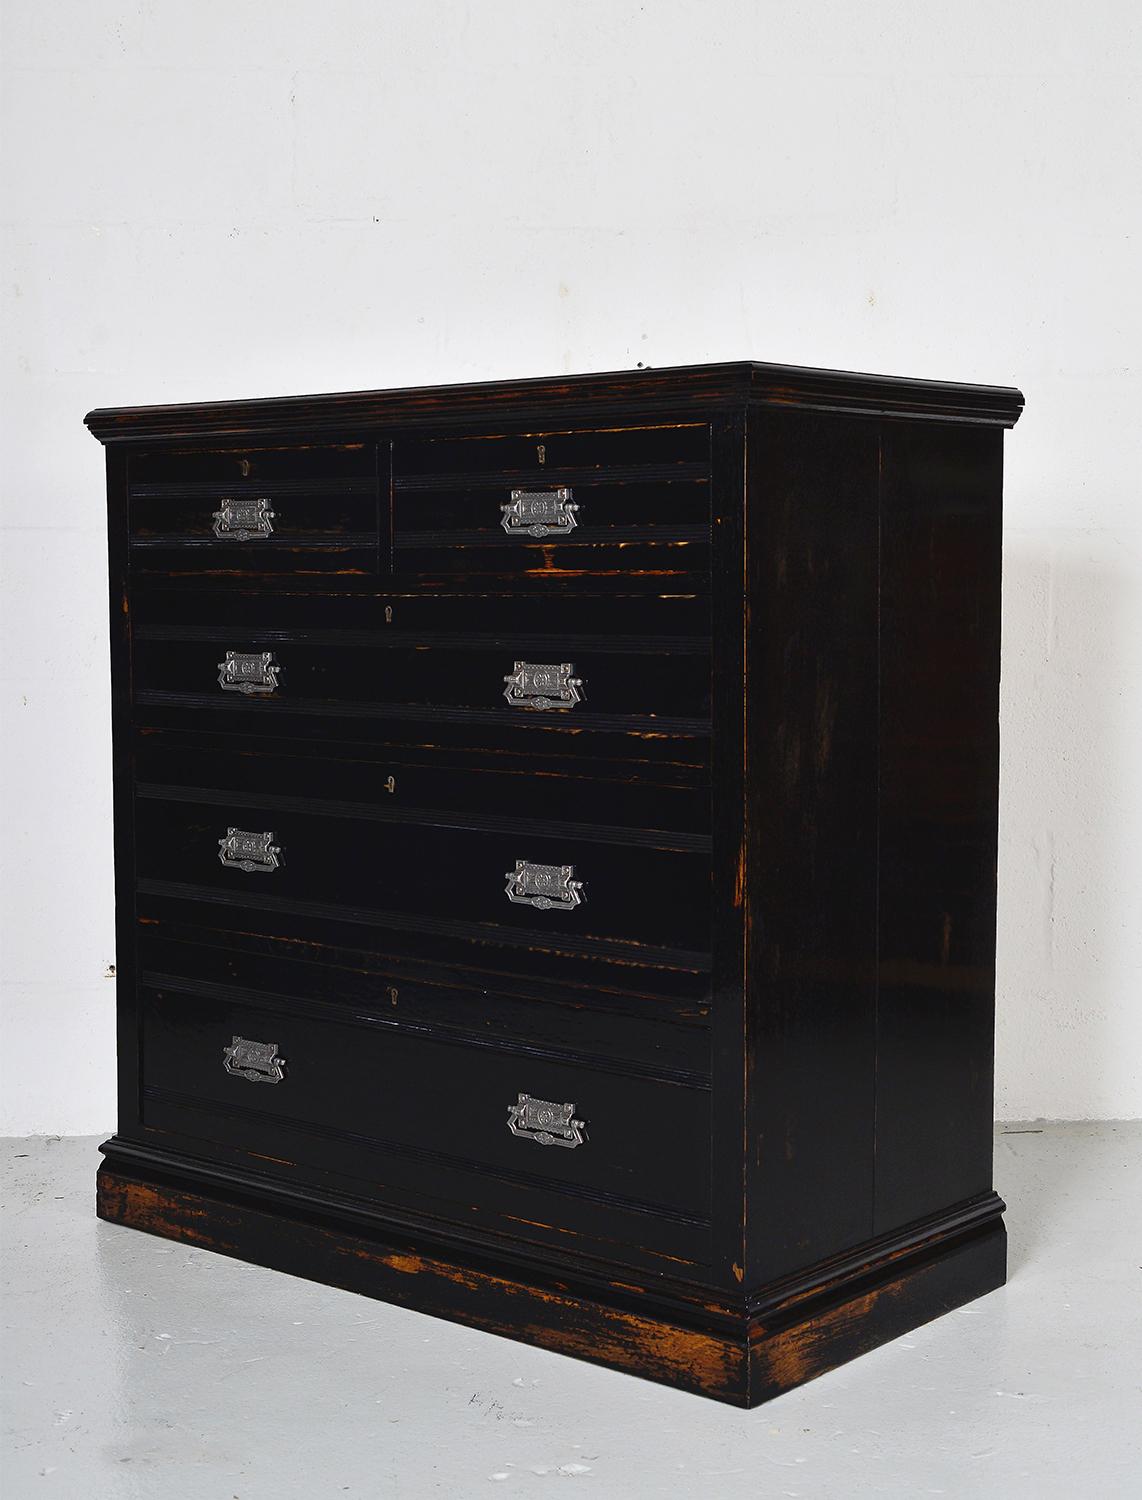 Late 19th century chest of drawers in the Eastlake style, ebonized in the Aesthetic taste. In its worn Piano black French polish finish, the rich tones of the quarter sawn oak peek through. Two over three drawers each with a wonderful reeded detail